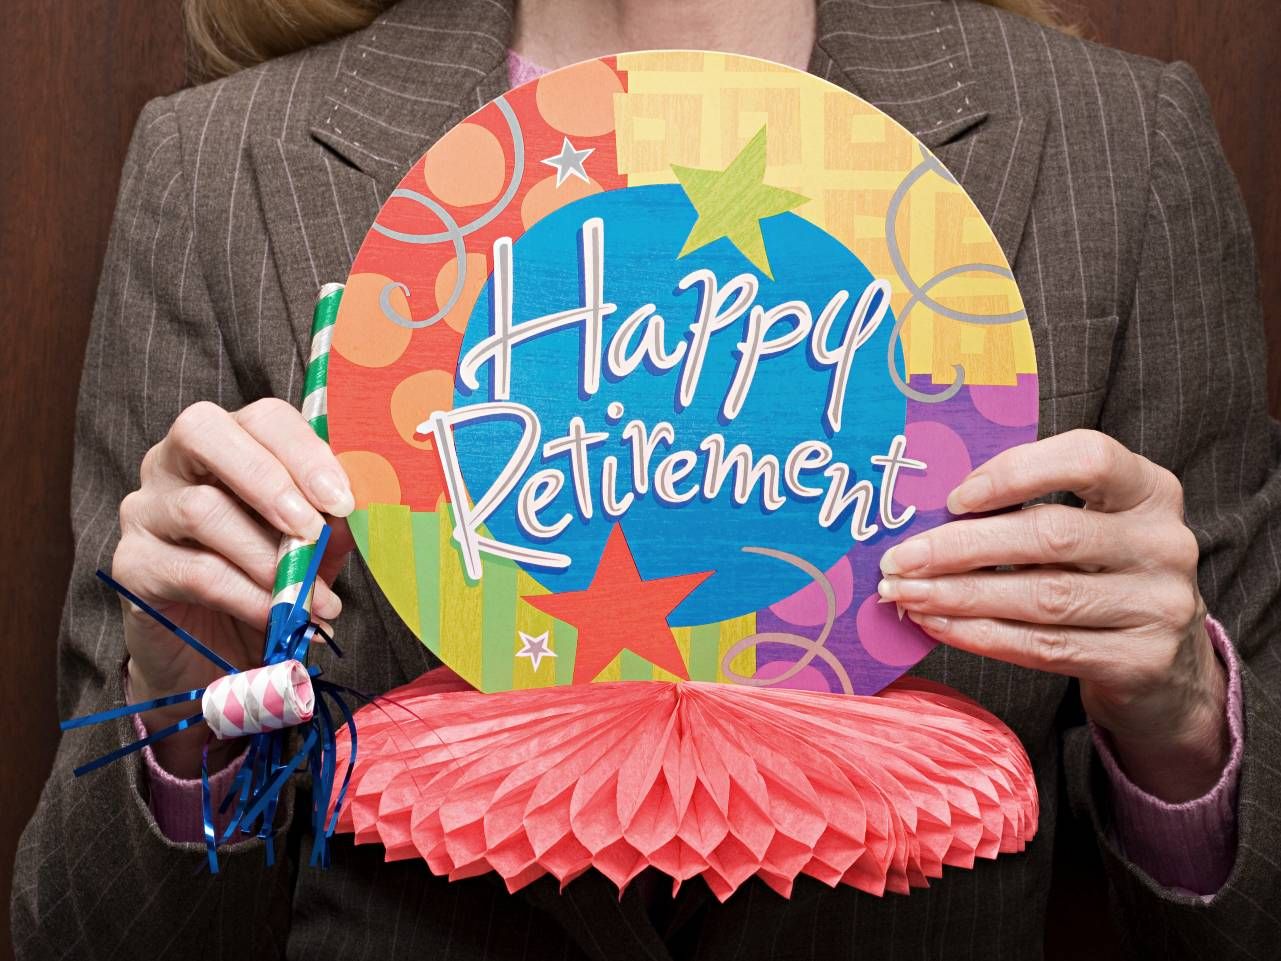 Senior Living: How to have a happy retirement